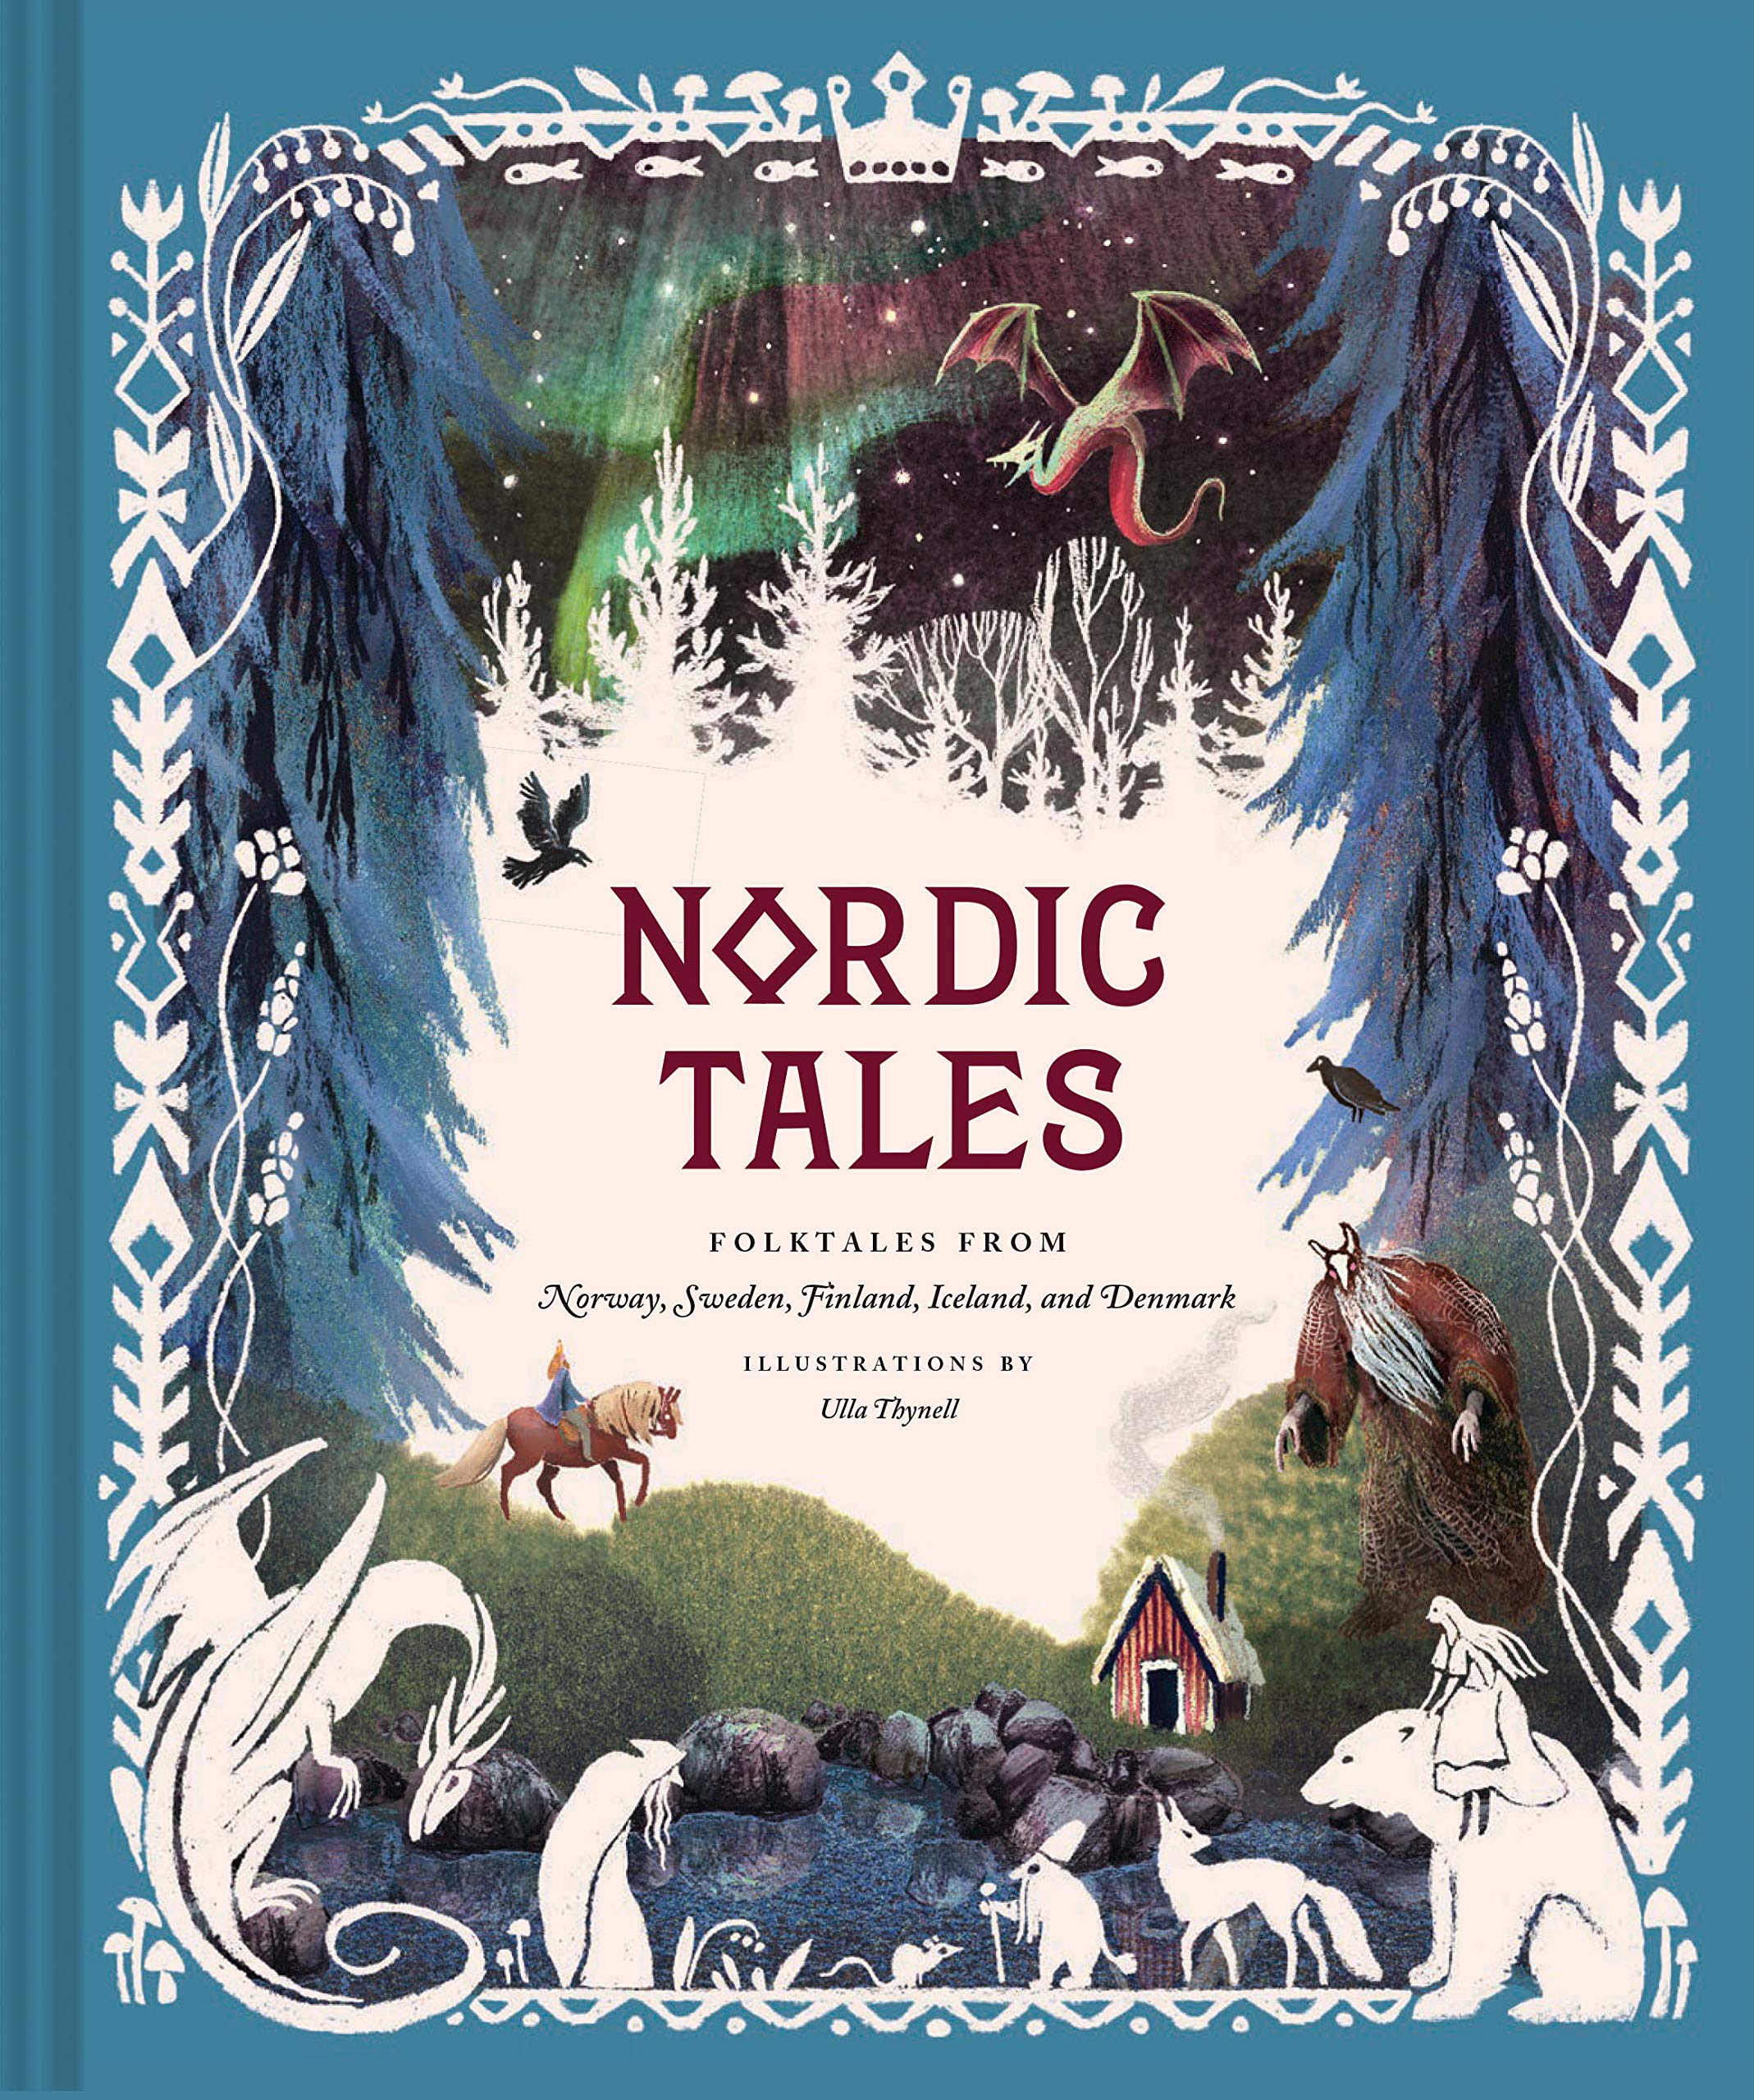 Image for "Nordic Tales"